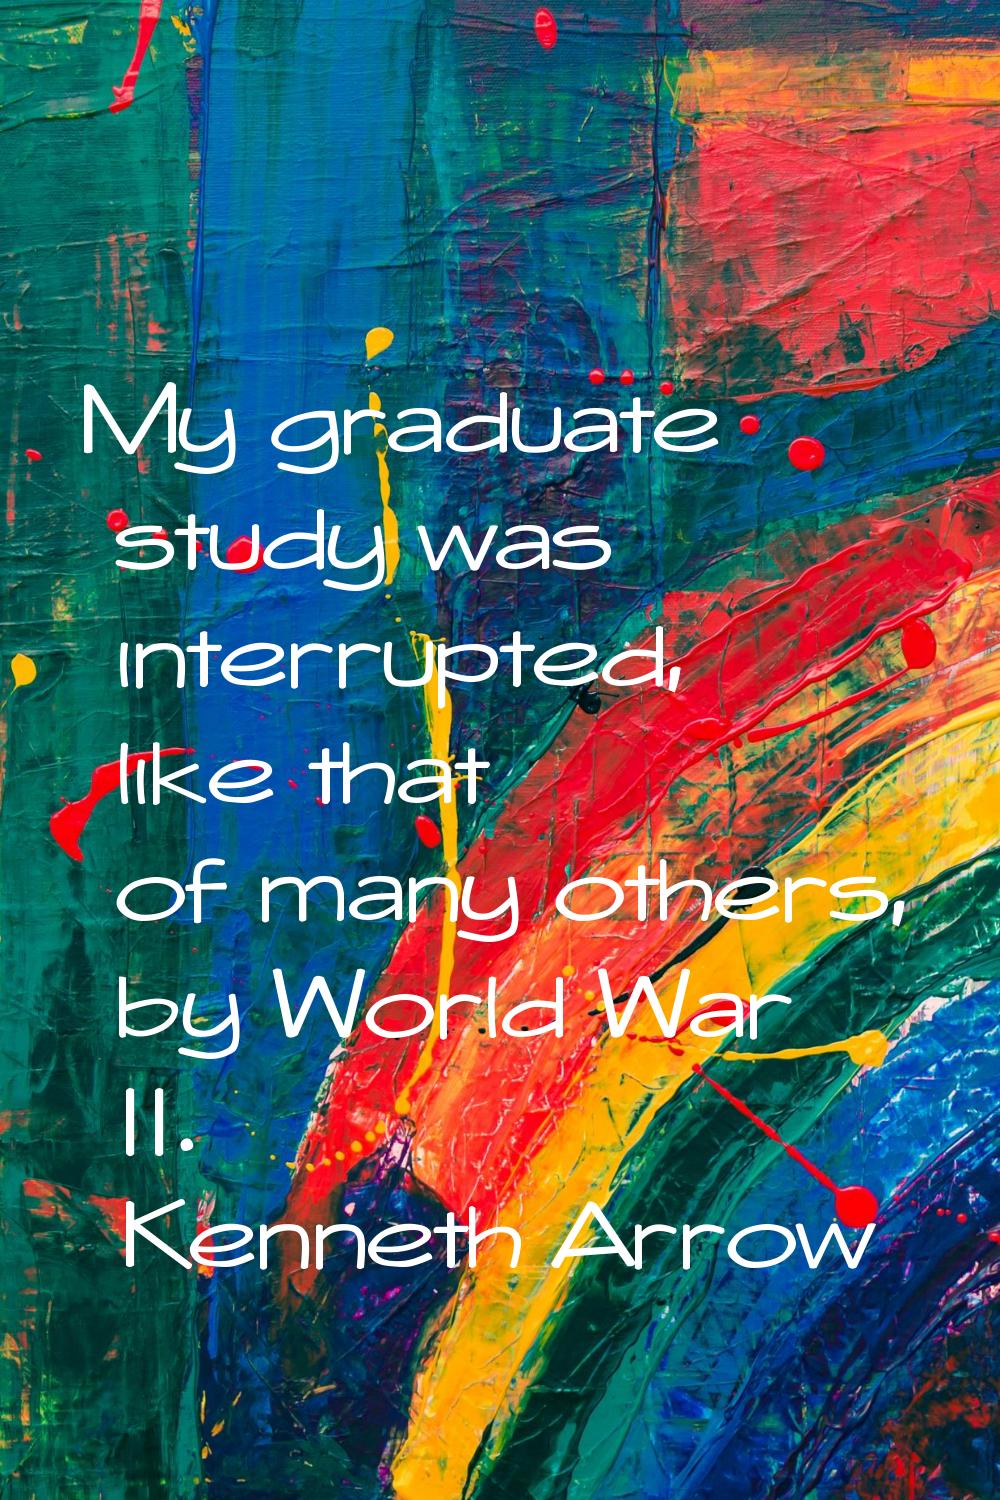 My graduate study was interrupted, like that of many others, by World War II.